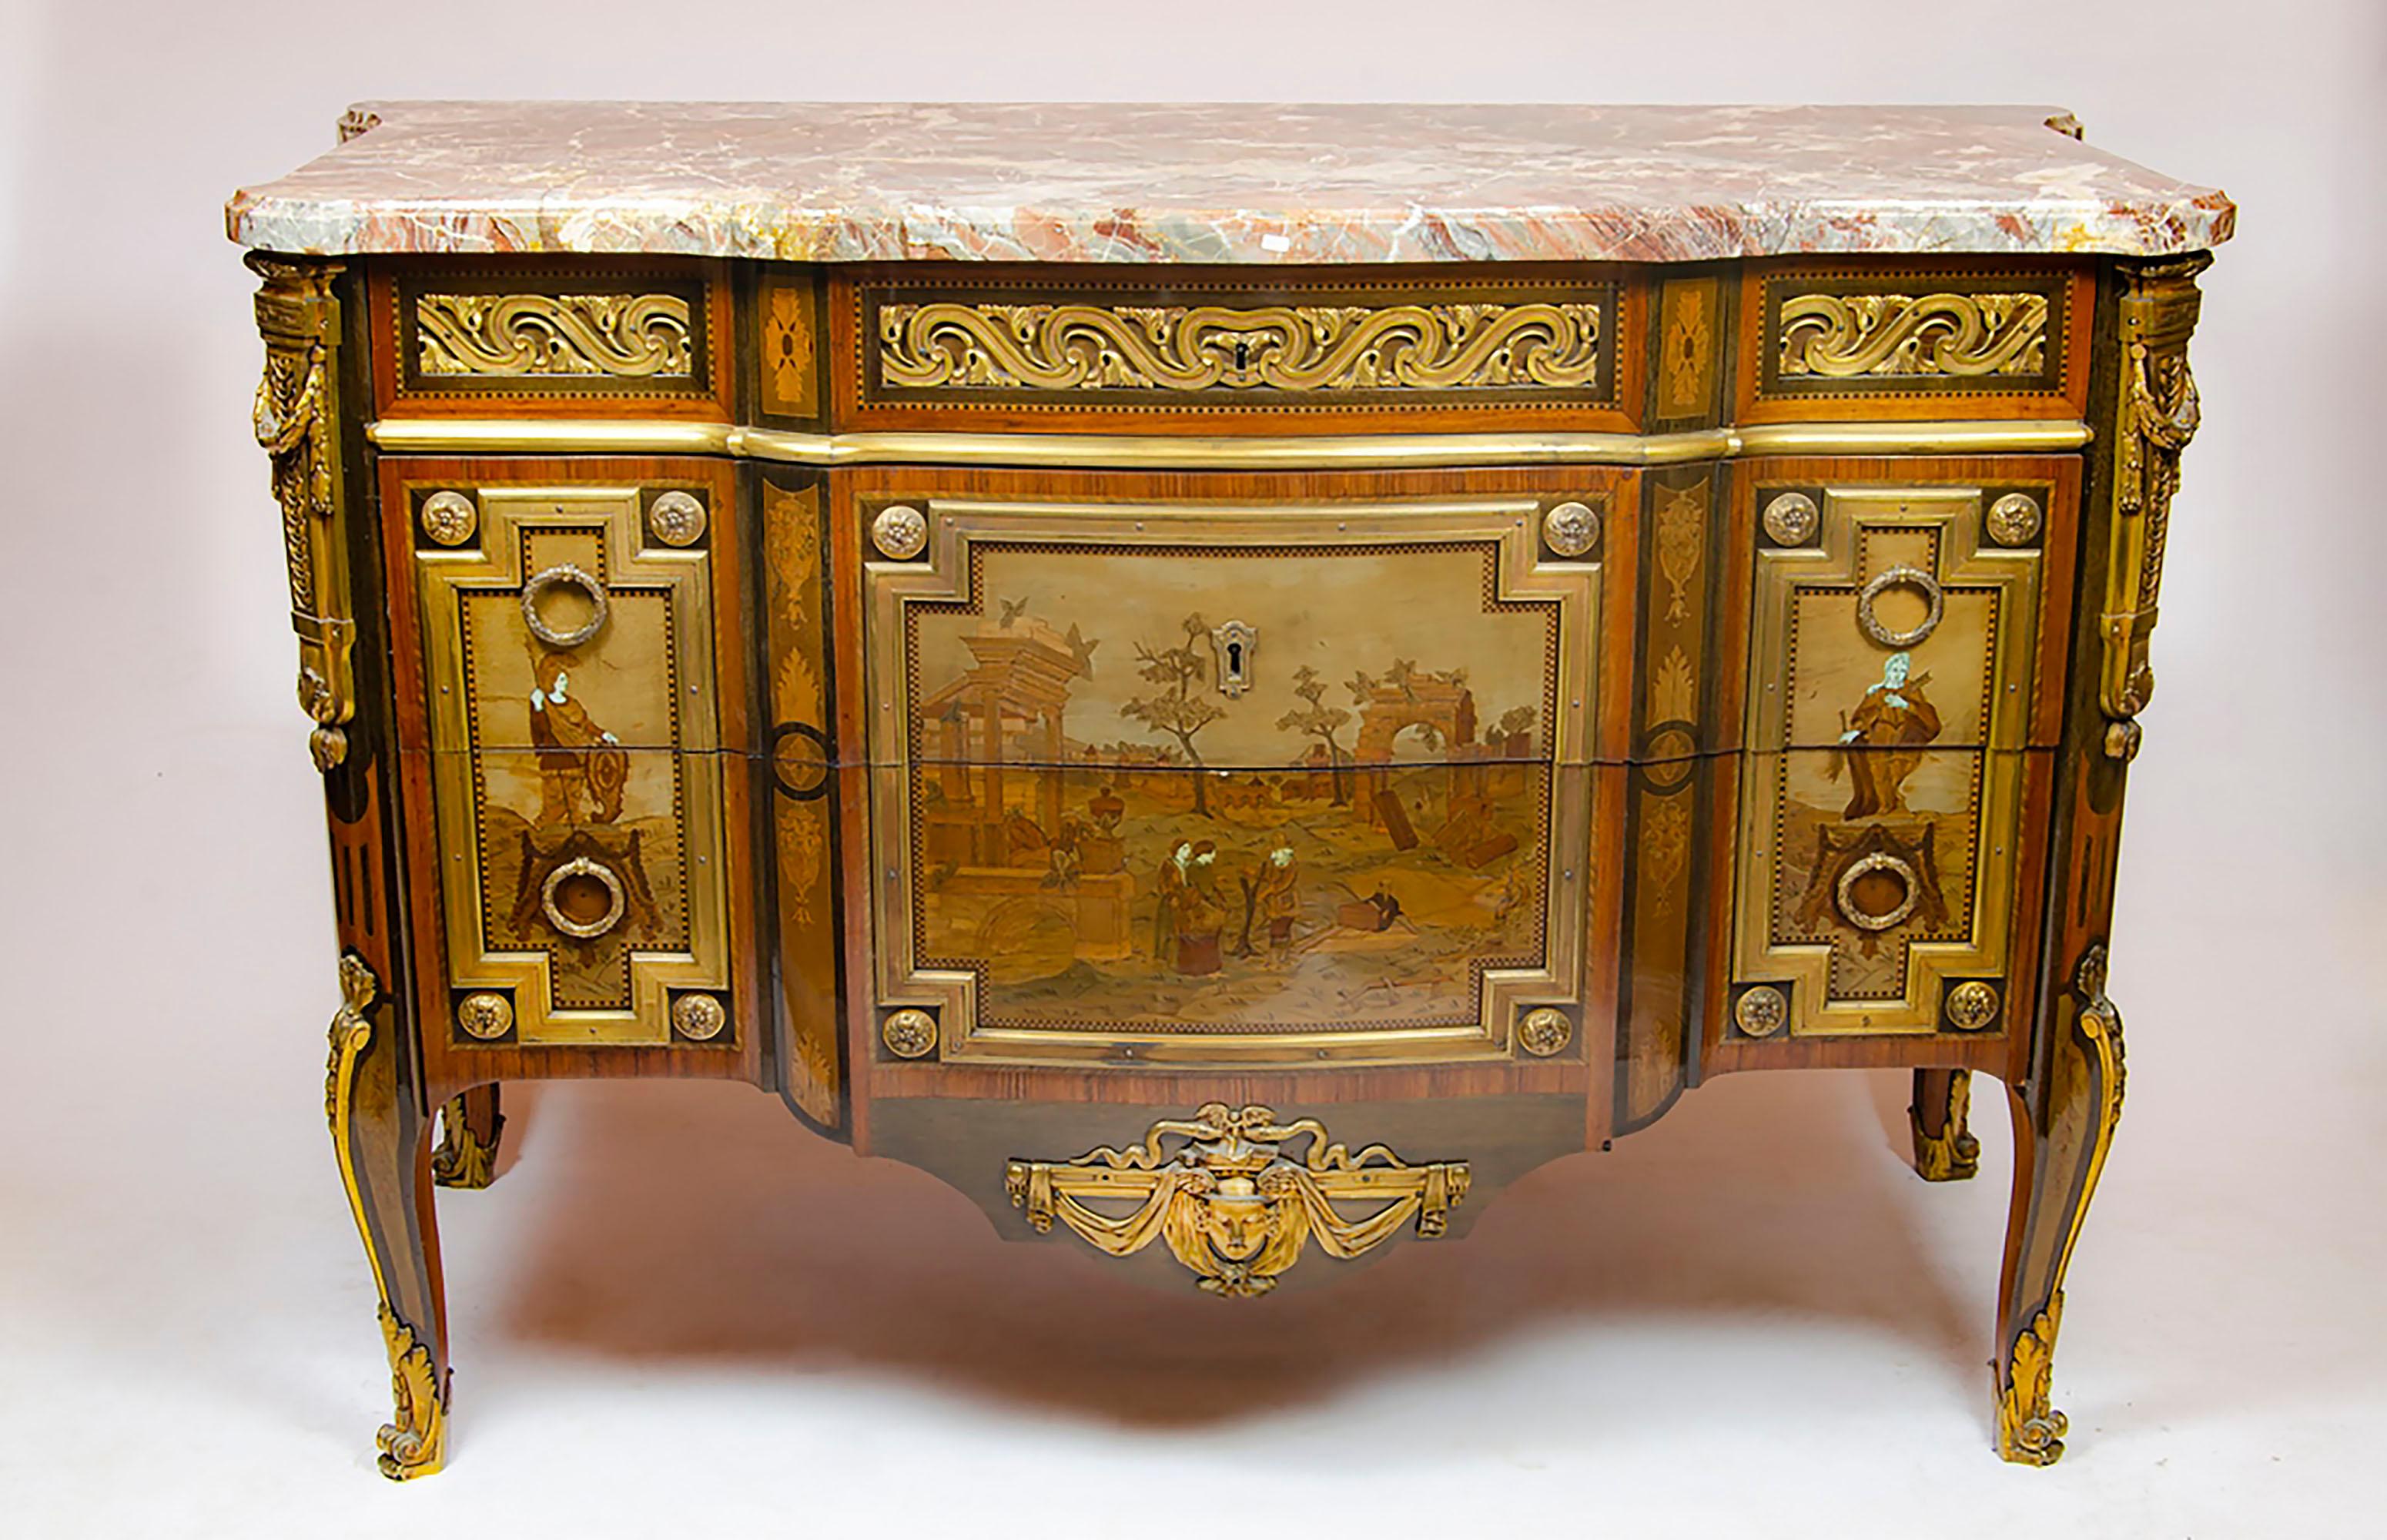 This form of commode or chest of drawers, with a 'breakfront' or projection section in the middle, was particularly favoured by the Parisian cabinet-maker Roger Vandercruse (1727-1799), although his was not the only workshop to produce them. A